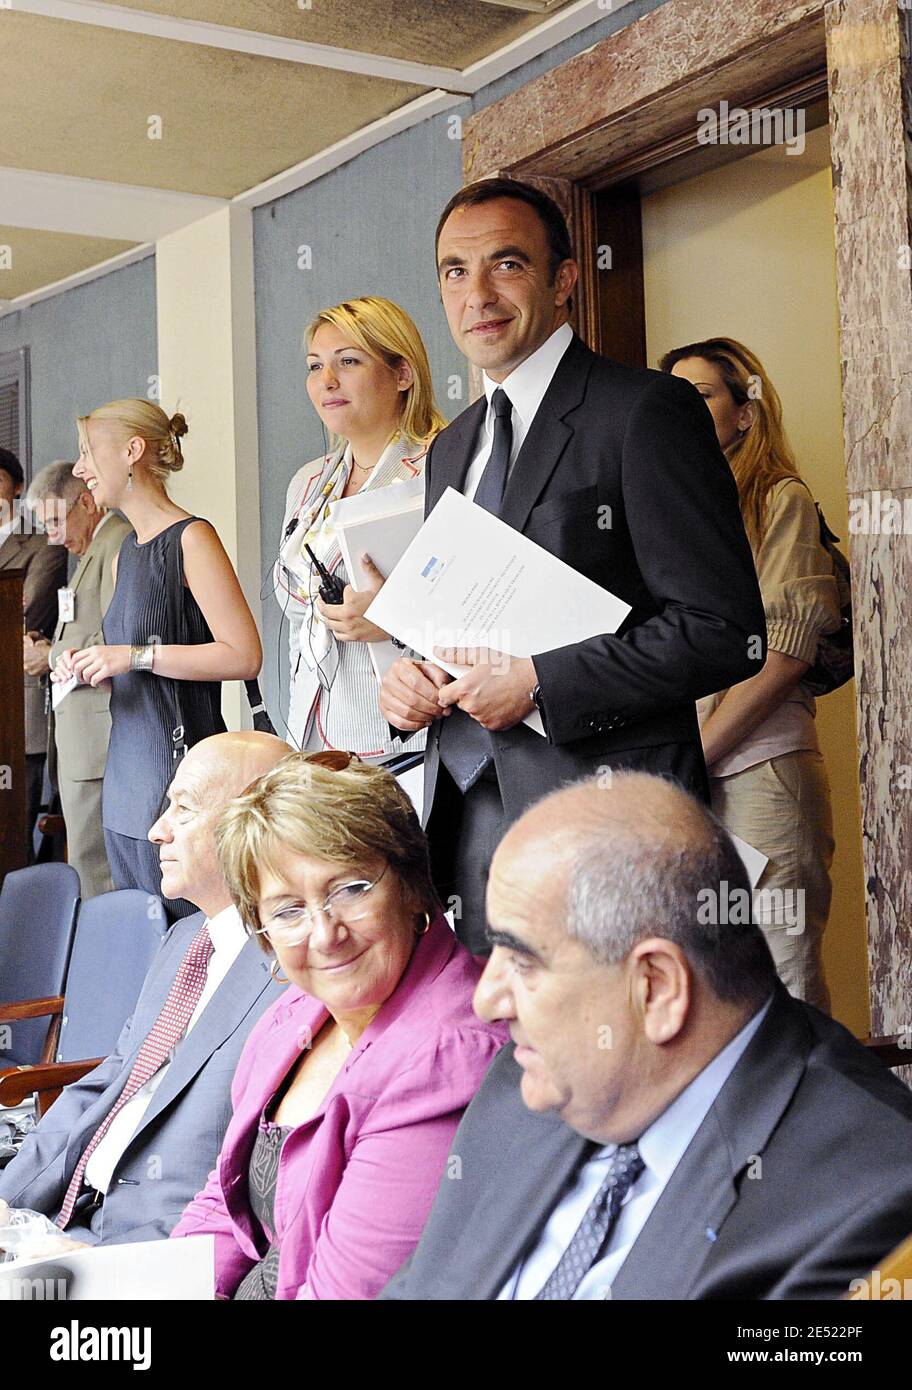 Greek Nikos Aliagas gestures prior to the arrival of French President Nicolas Sarkozy (not in the picture) in the Greek parliament in Athens, Greece on June 6, 2008. Sarkozy arrived in Greece Friday for an official visit, the first by a French head of state in more than 25 years. Sarkozy was addressing the Greek parliament in a ceremony only accorded to three foreign presidents in the past: his predecessor Charles de Gaulle and US presidents Dwight Eisenhower and George Bush Sr. Photo by Mousse/ABACAPRESS.COM Stock Photo